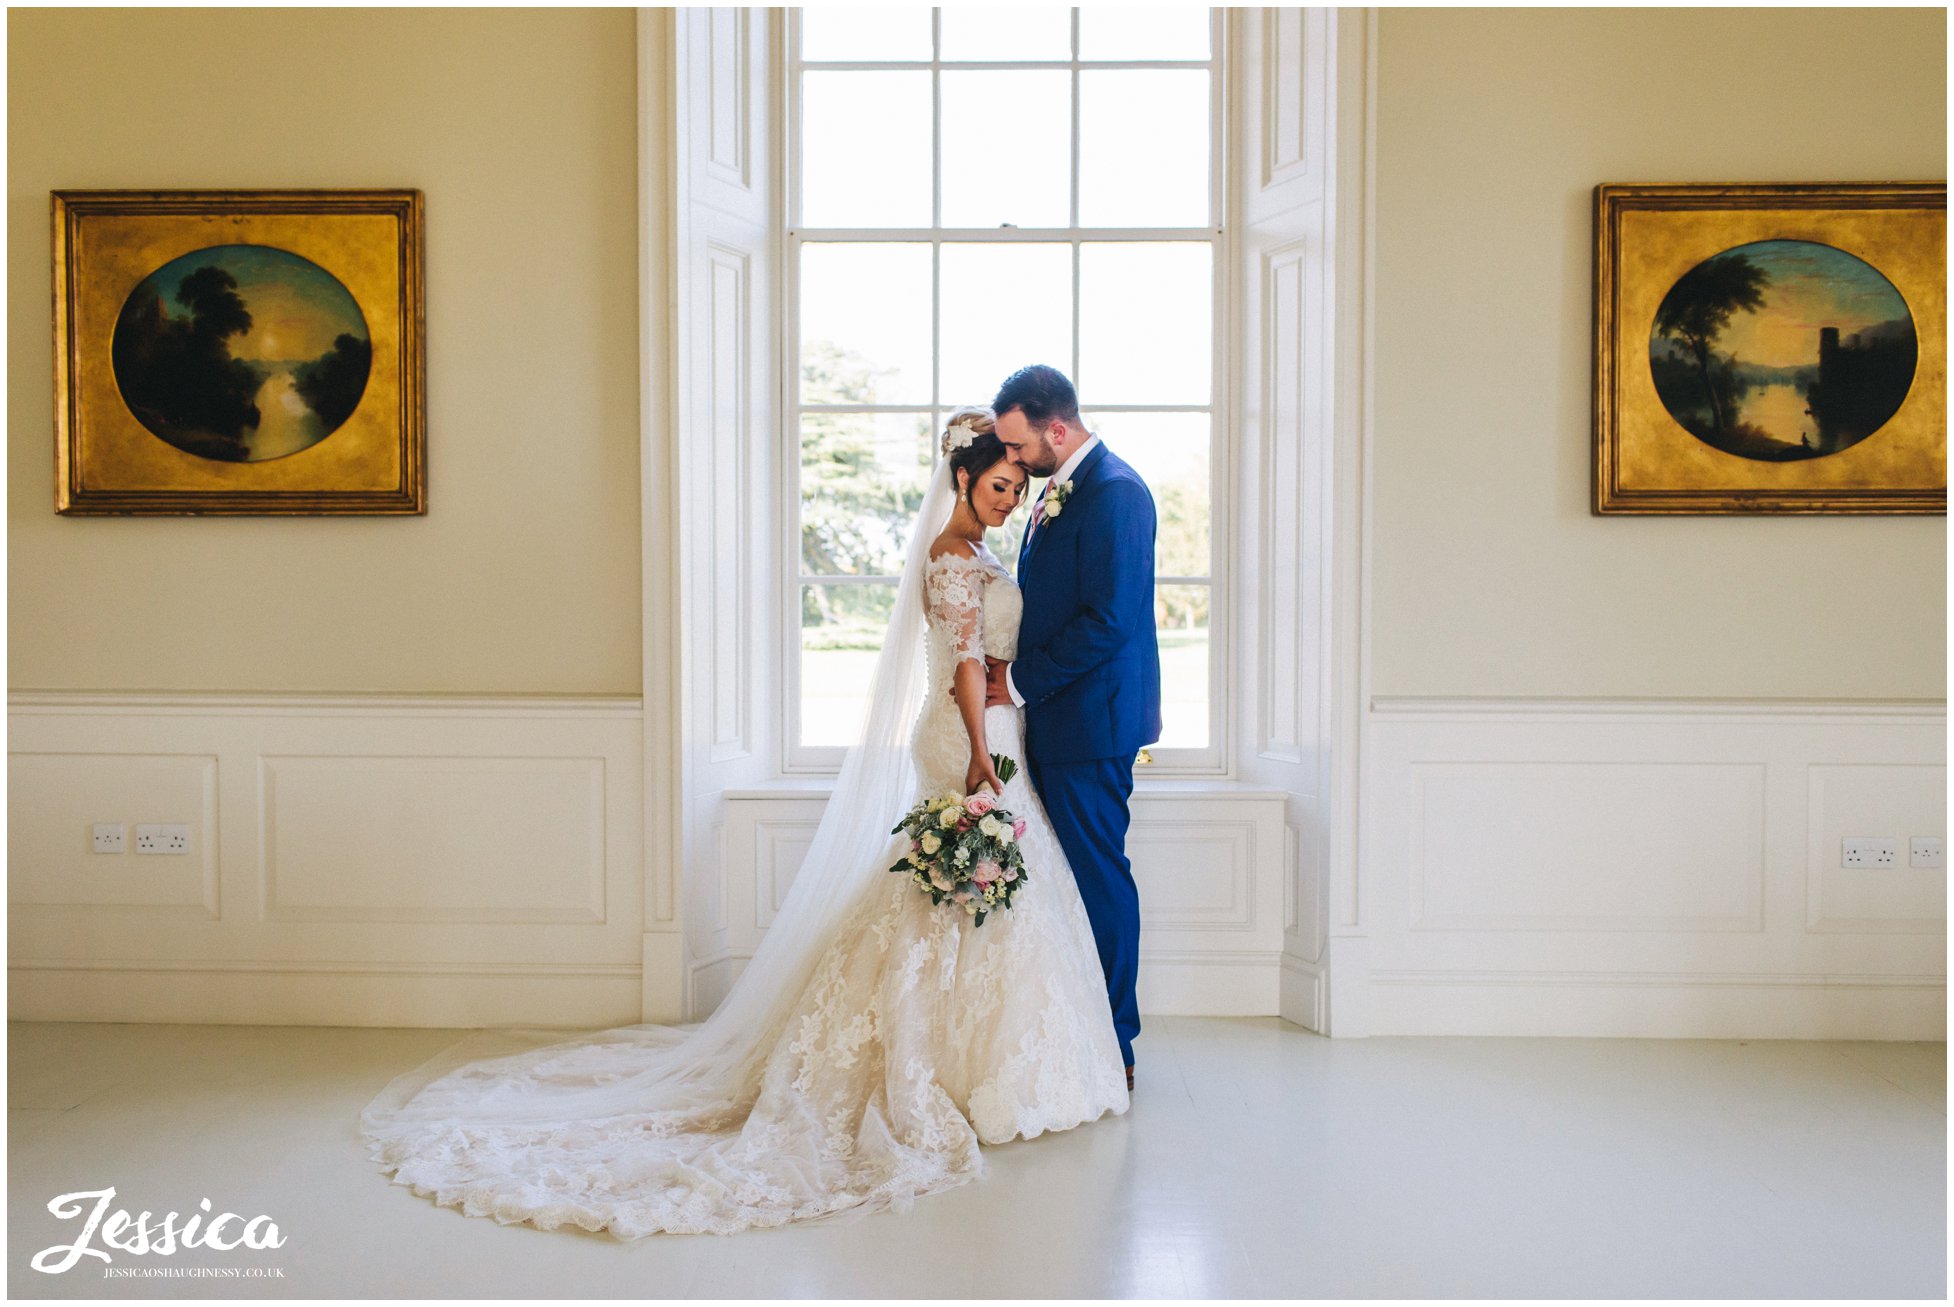 the couple hold each other in stubton hall's music room